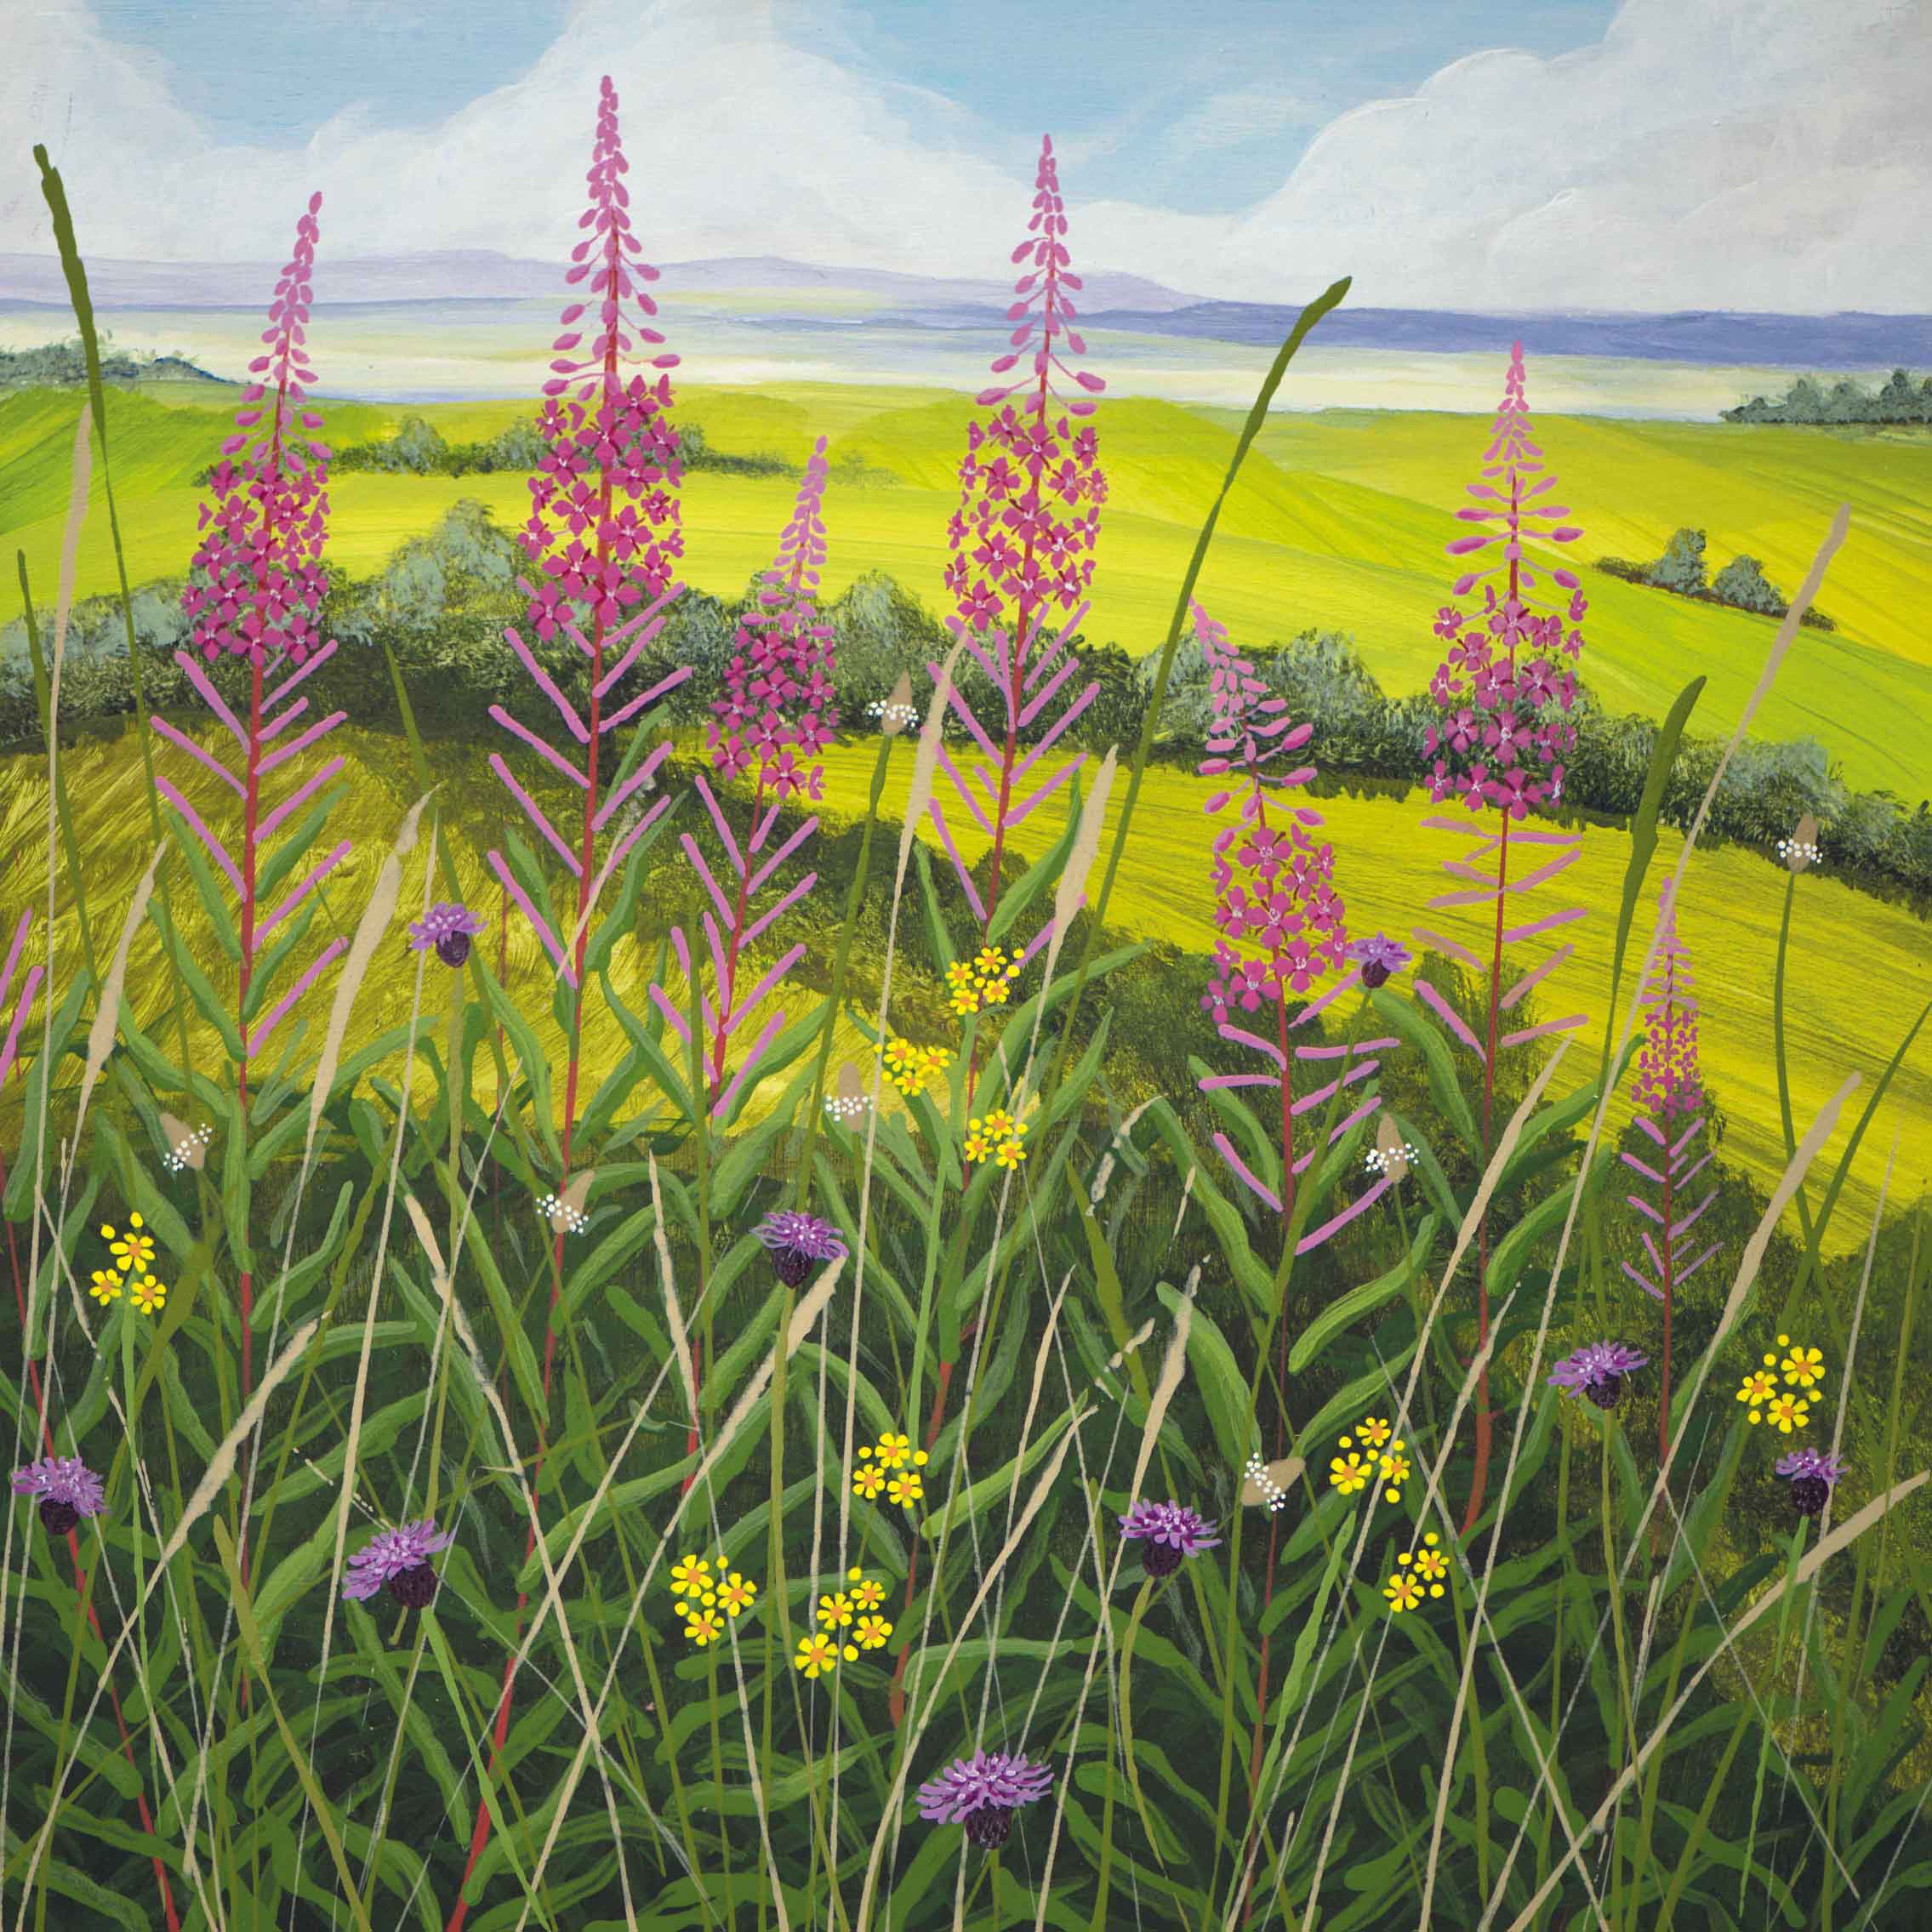 Art greeting card by Carla Vize-Martin, Willow Herb, acrylic on board, landscape with willow herb